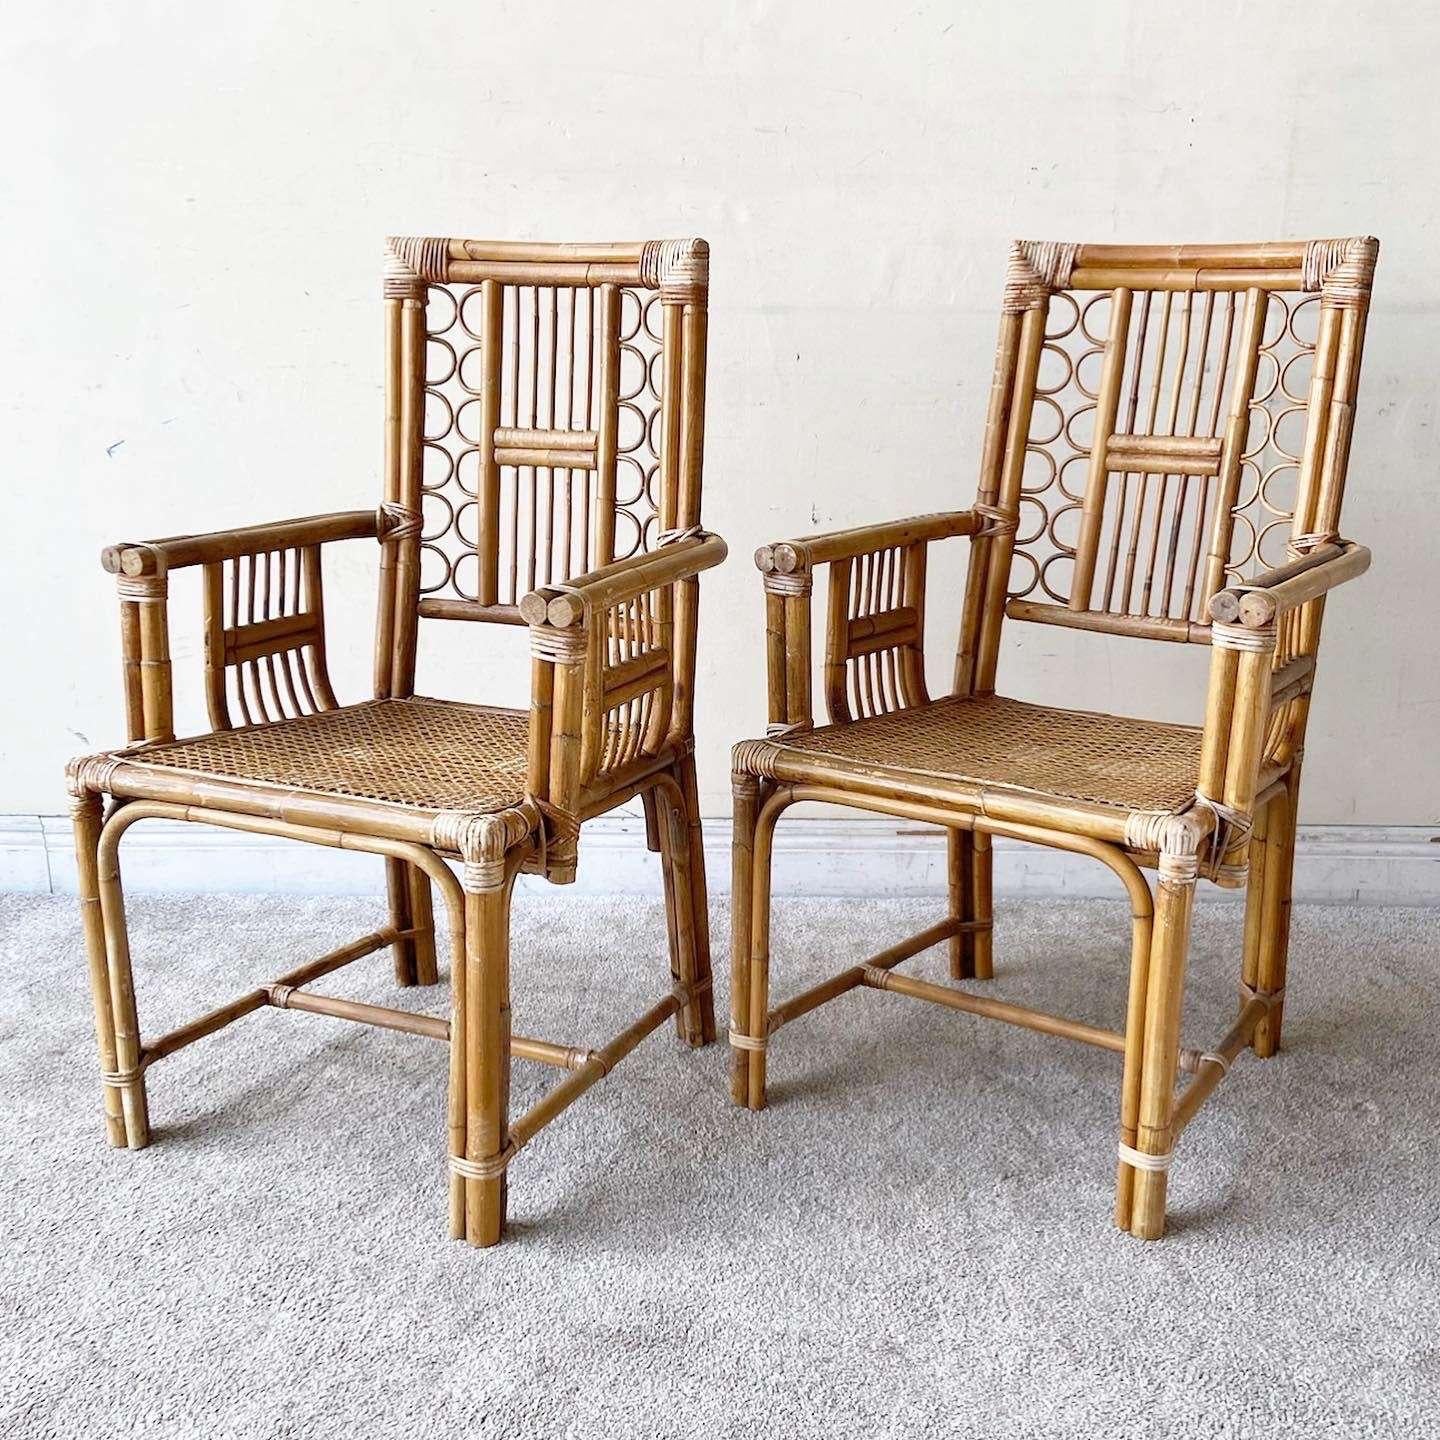 Late 20th Century Boho Chic Bamboo Rattan and Cane Dining Chairs Attributed to Brighton - a Pair For Sale